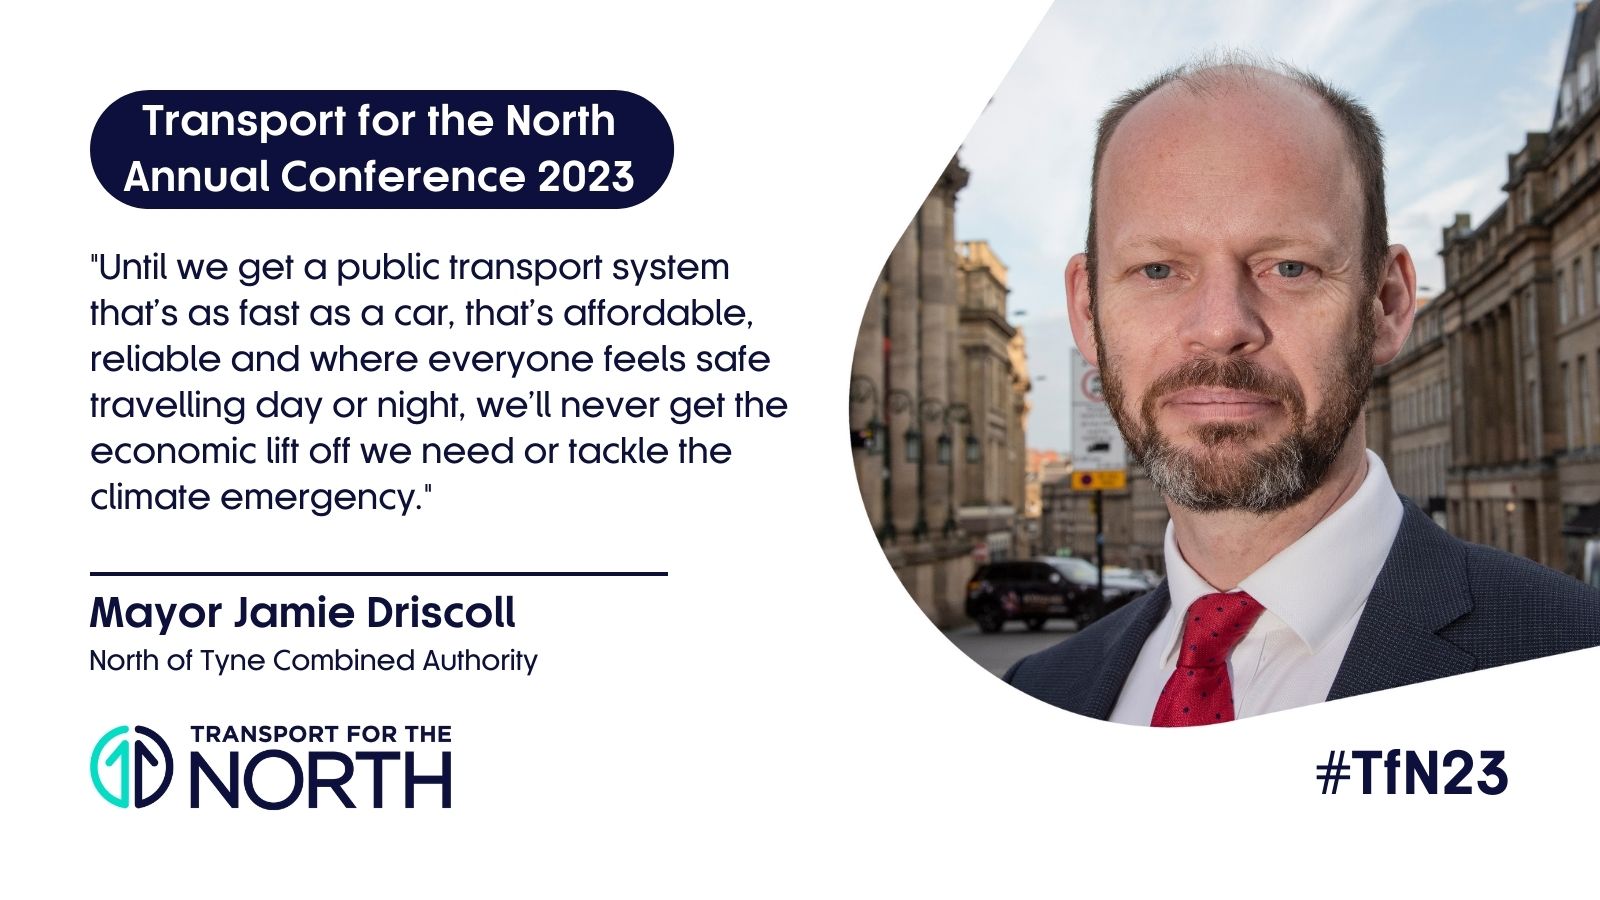 Mayor Jamie Driscoll quote for TfN conference